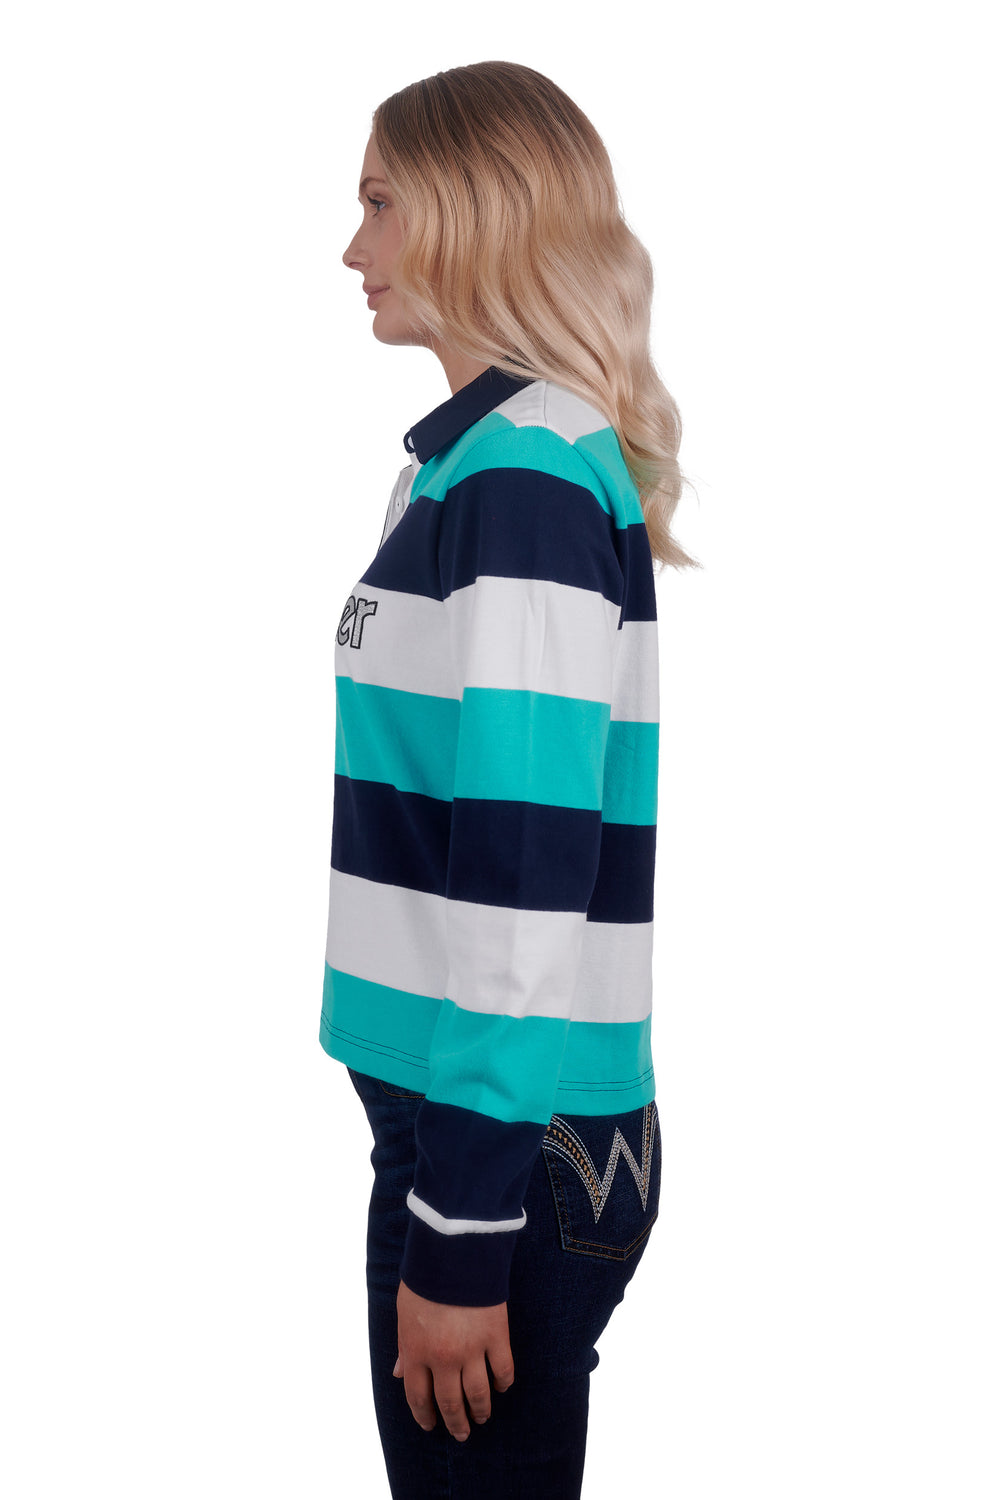 Wrangler - Womens Briana Rugby Jersey